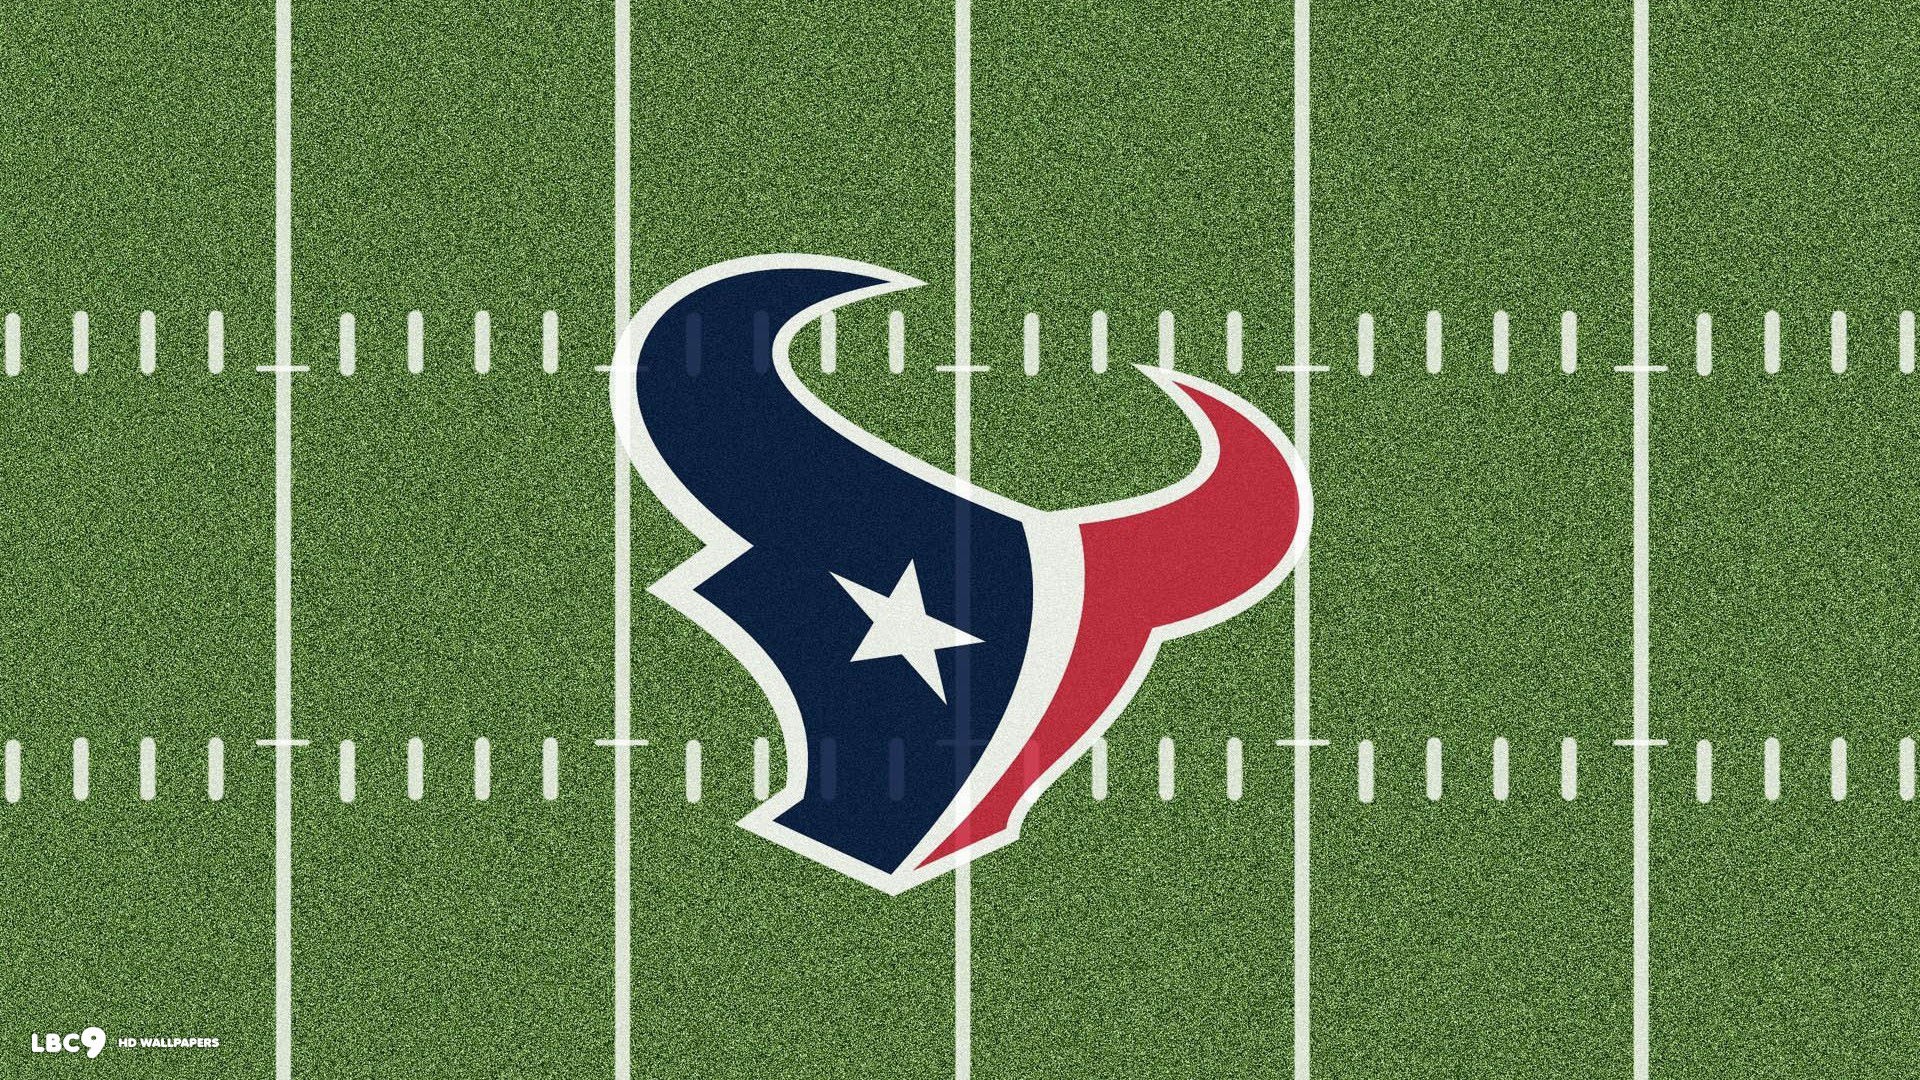 Houston Texans NFL Wallpaper with resolution 1920x1080 pixel. You can make this wallpaper for your Mac or Windows Desktop Background, iPhone, Android or Tablet and another Smartphone device